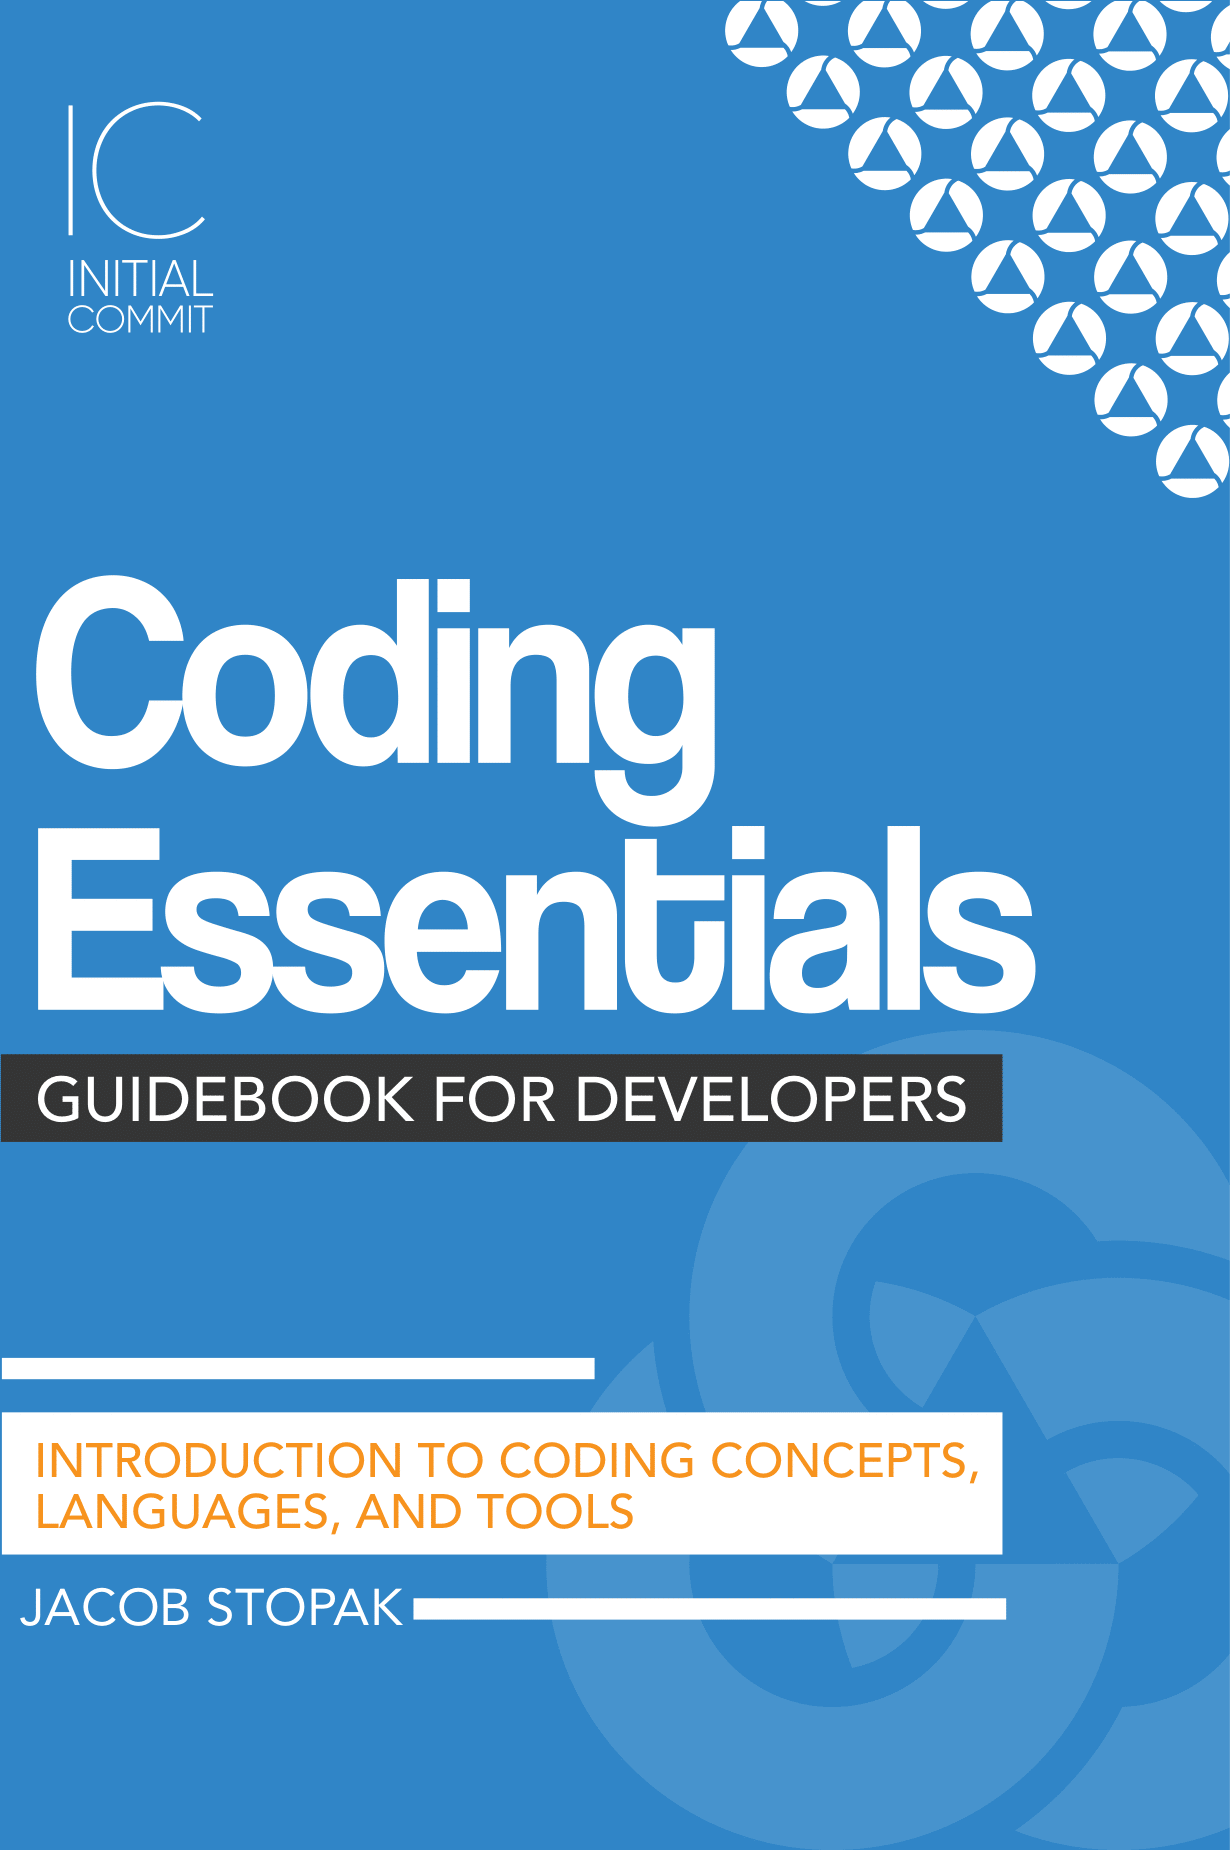 Image of the Coding Essentials Guidebook for Developers